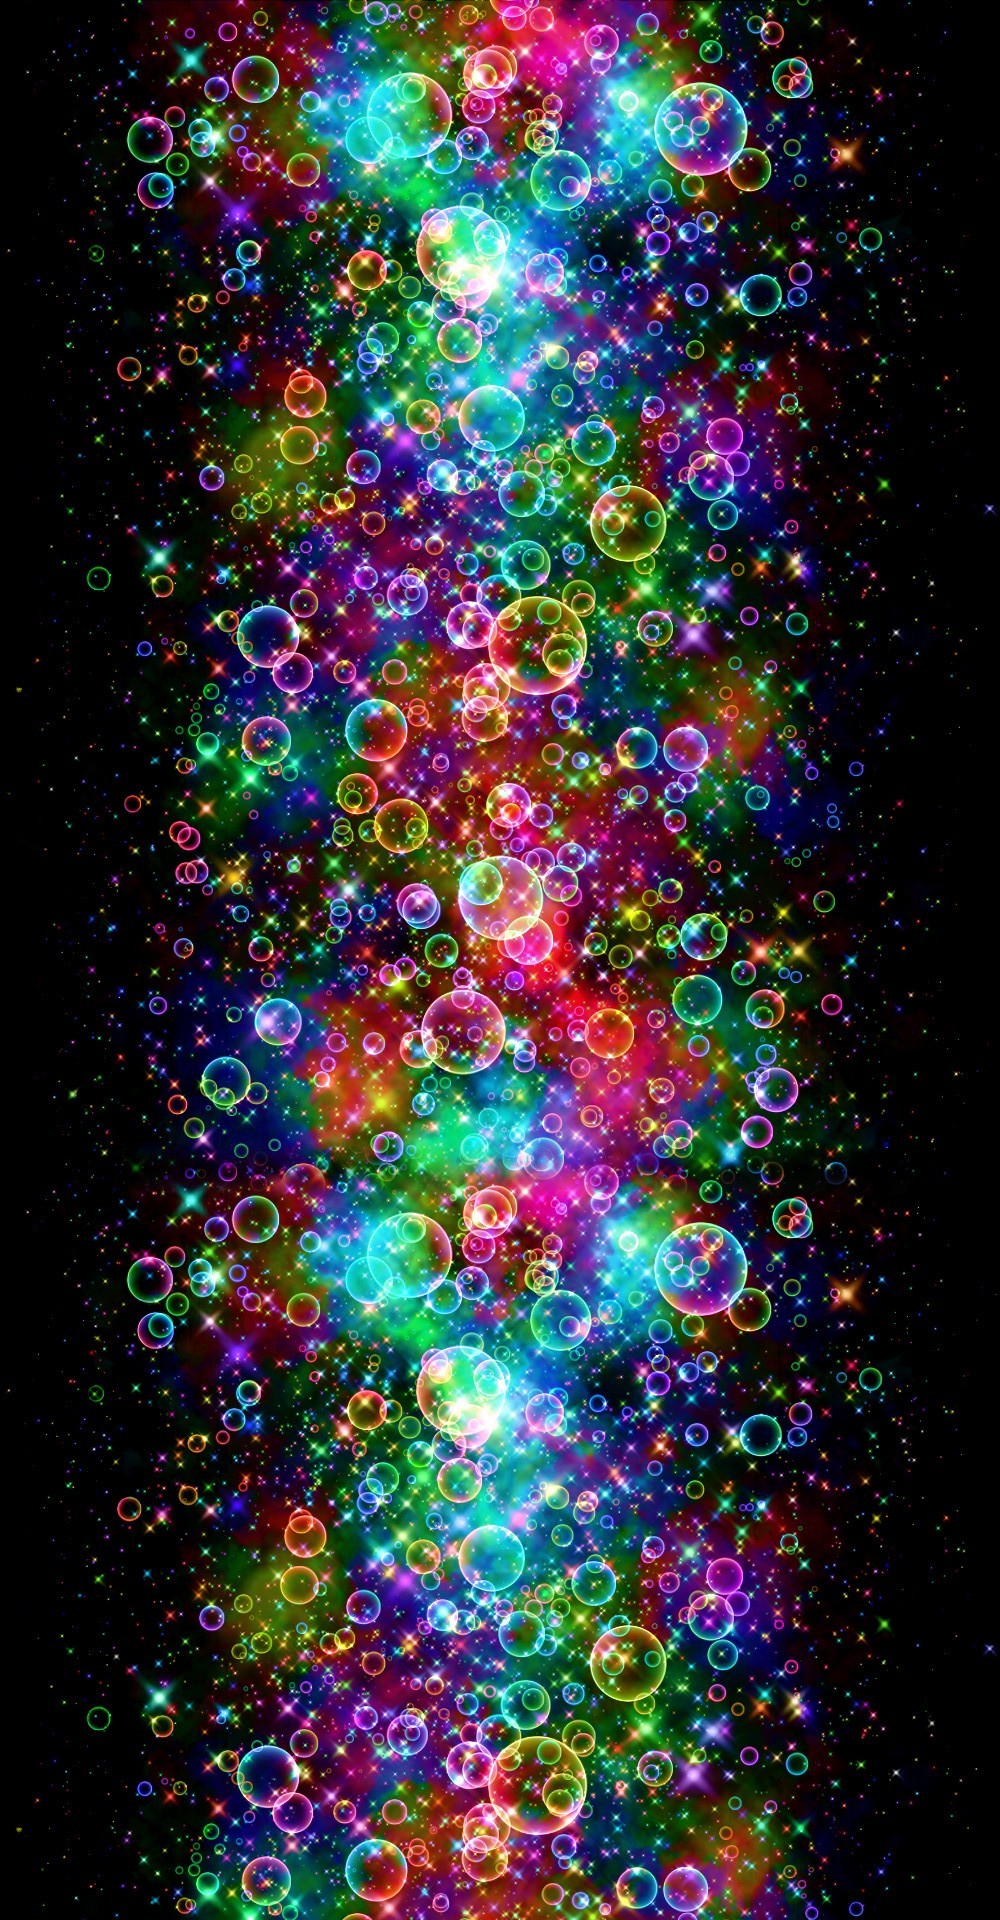 Sparkle Wallpaper That Moves - Rainbow Bubbles With Black Background - HD Wallpaper 